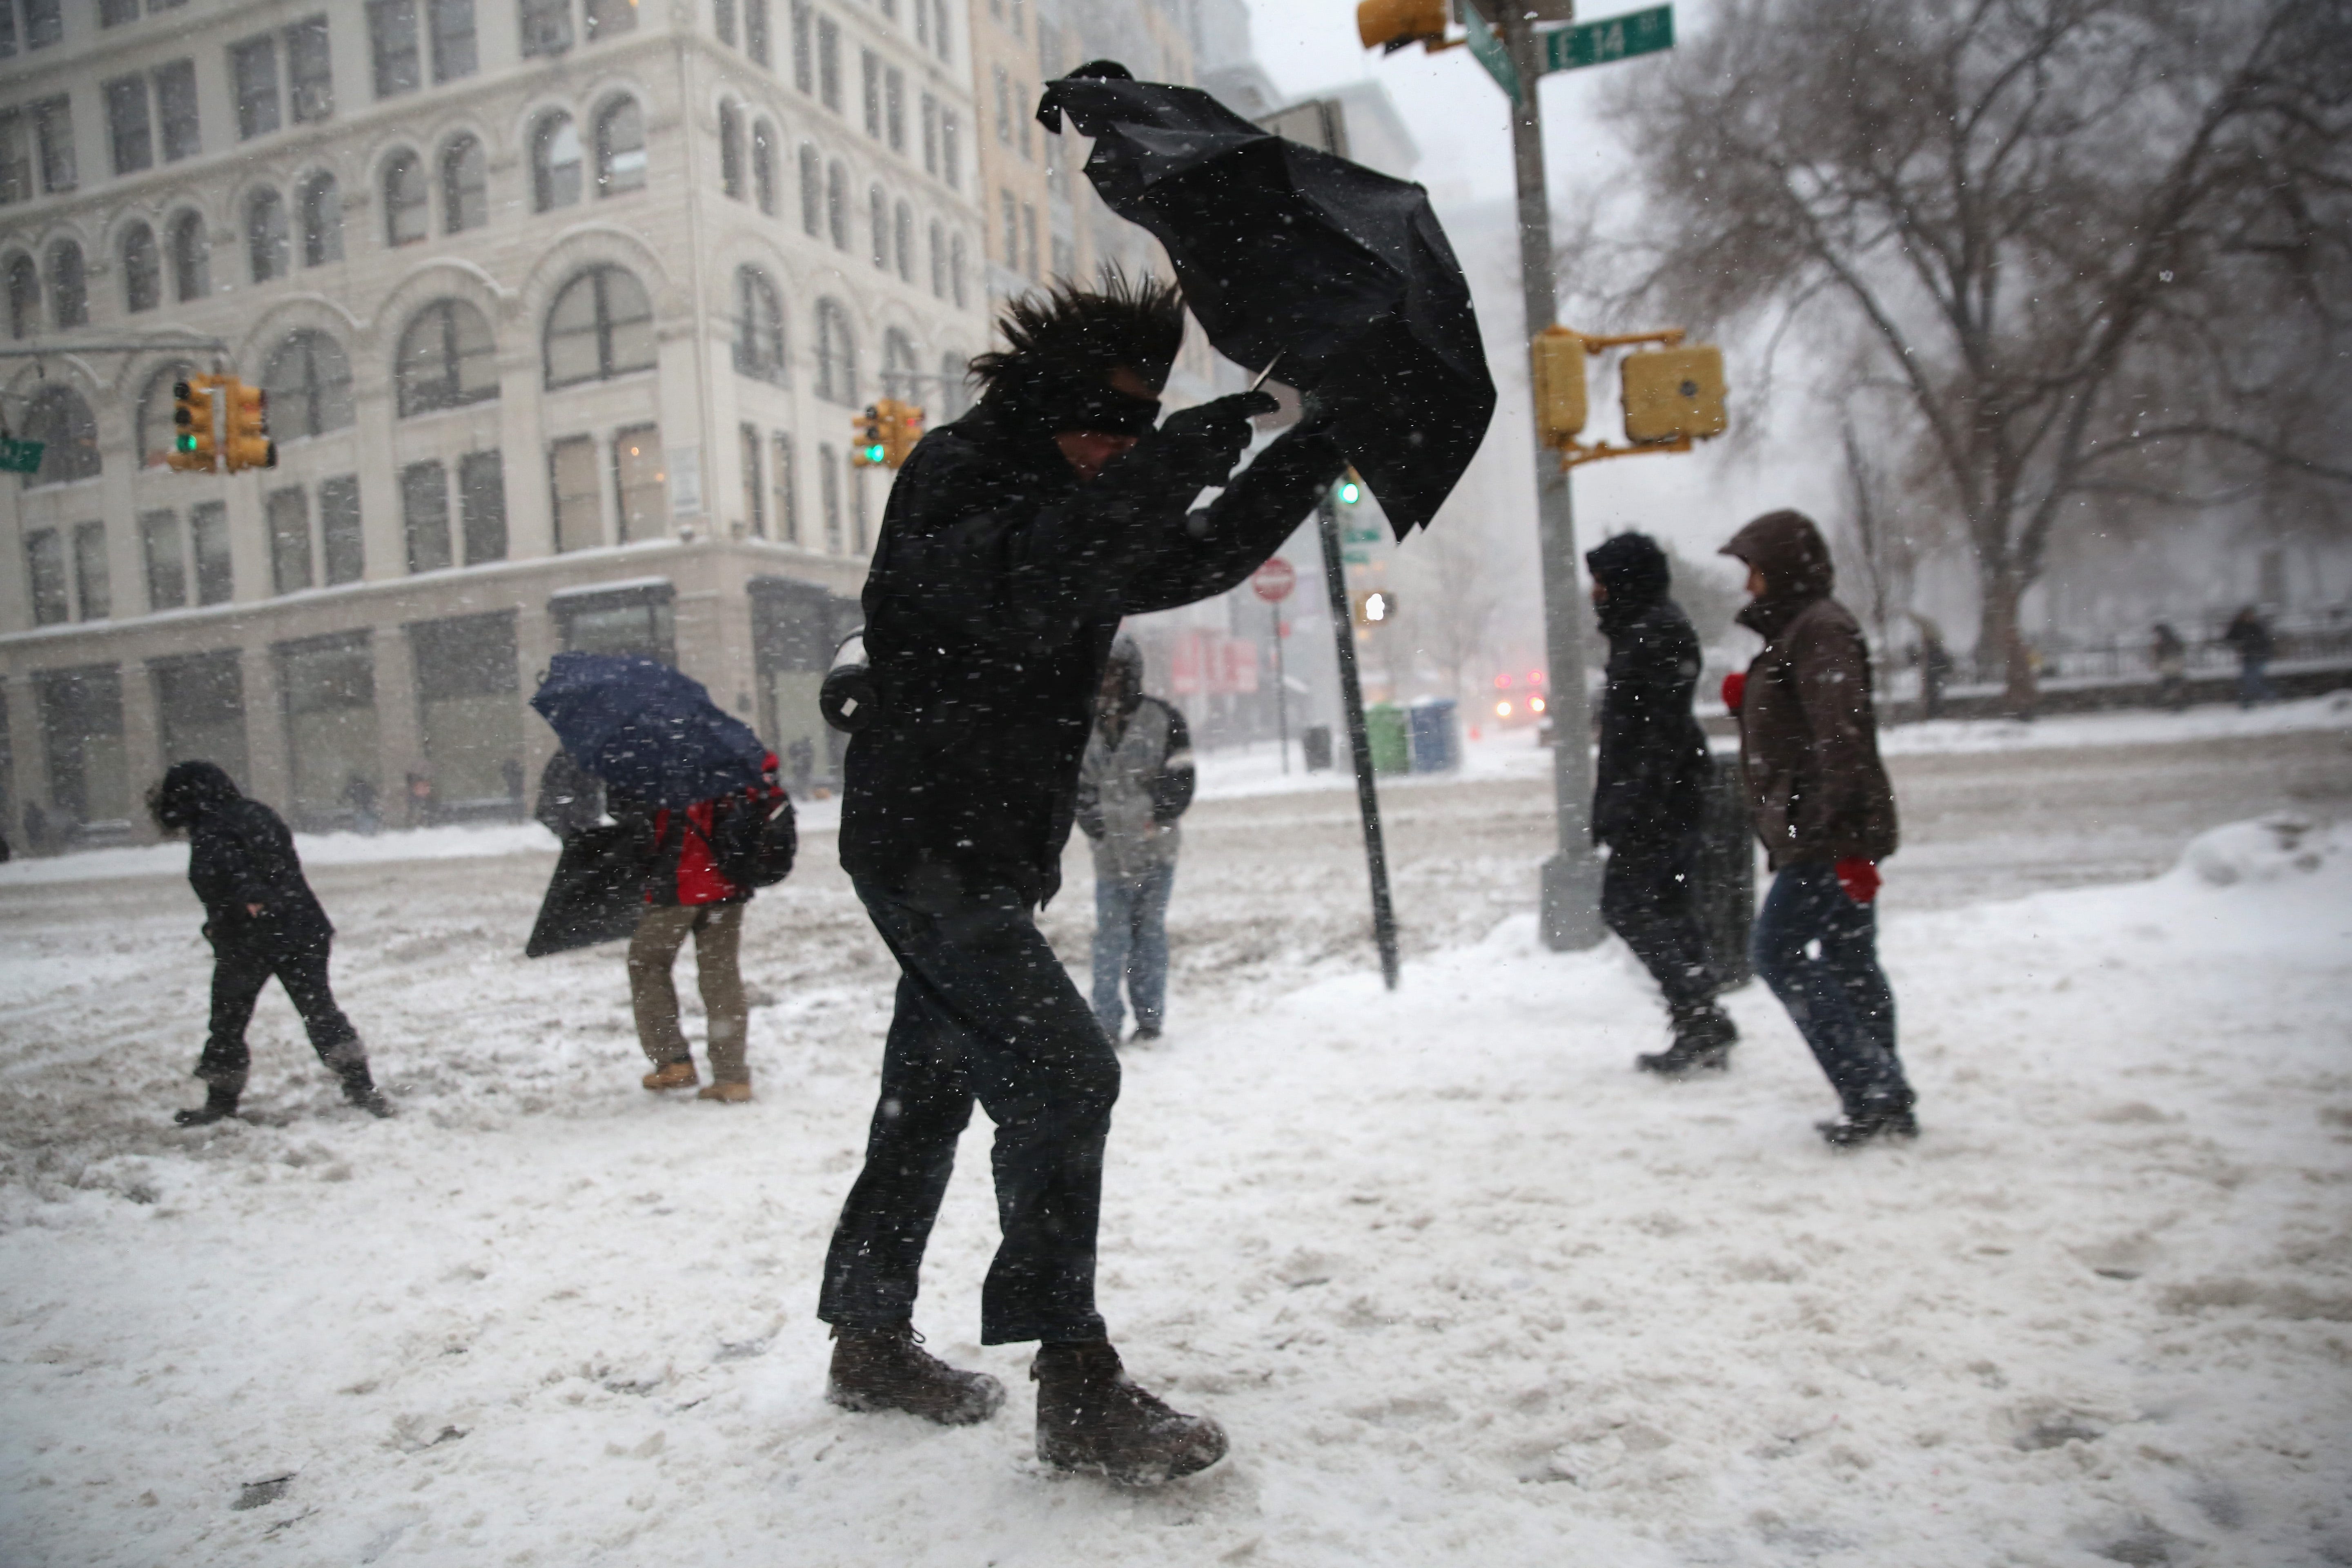 NYC mayor: Snowstorm could be worst ever